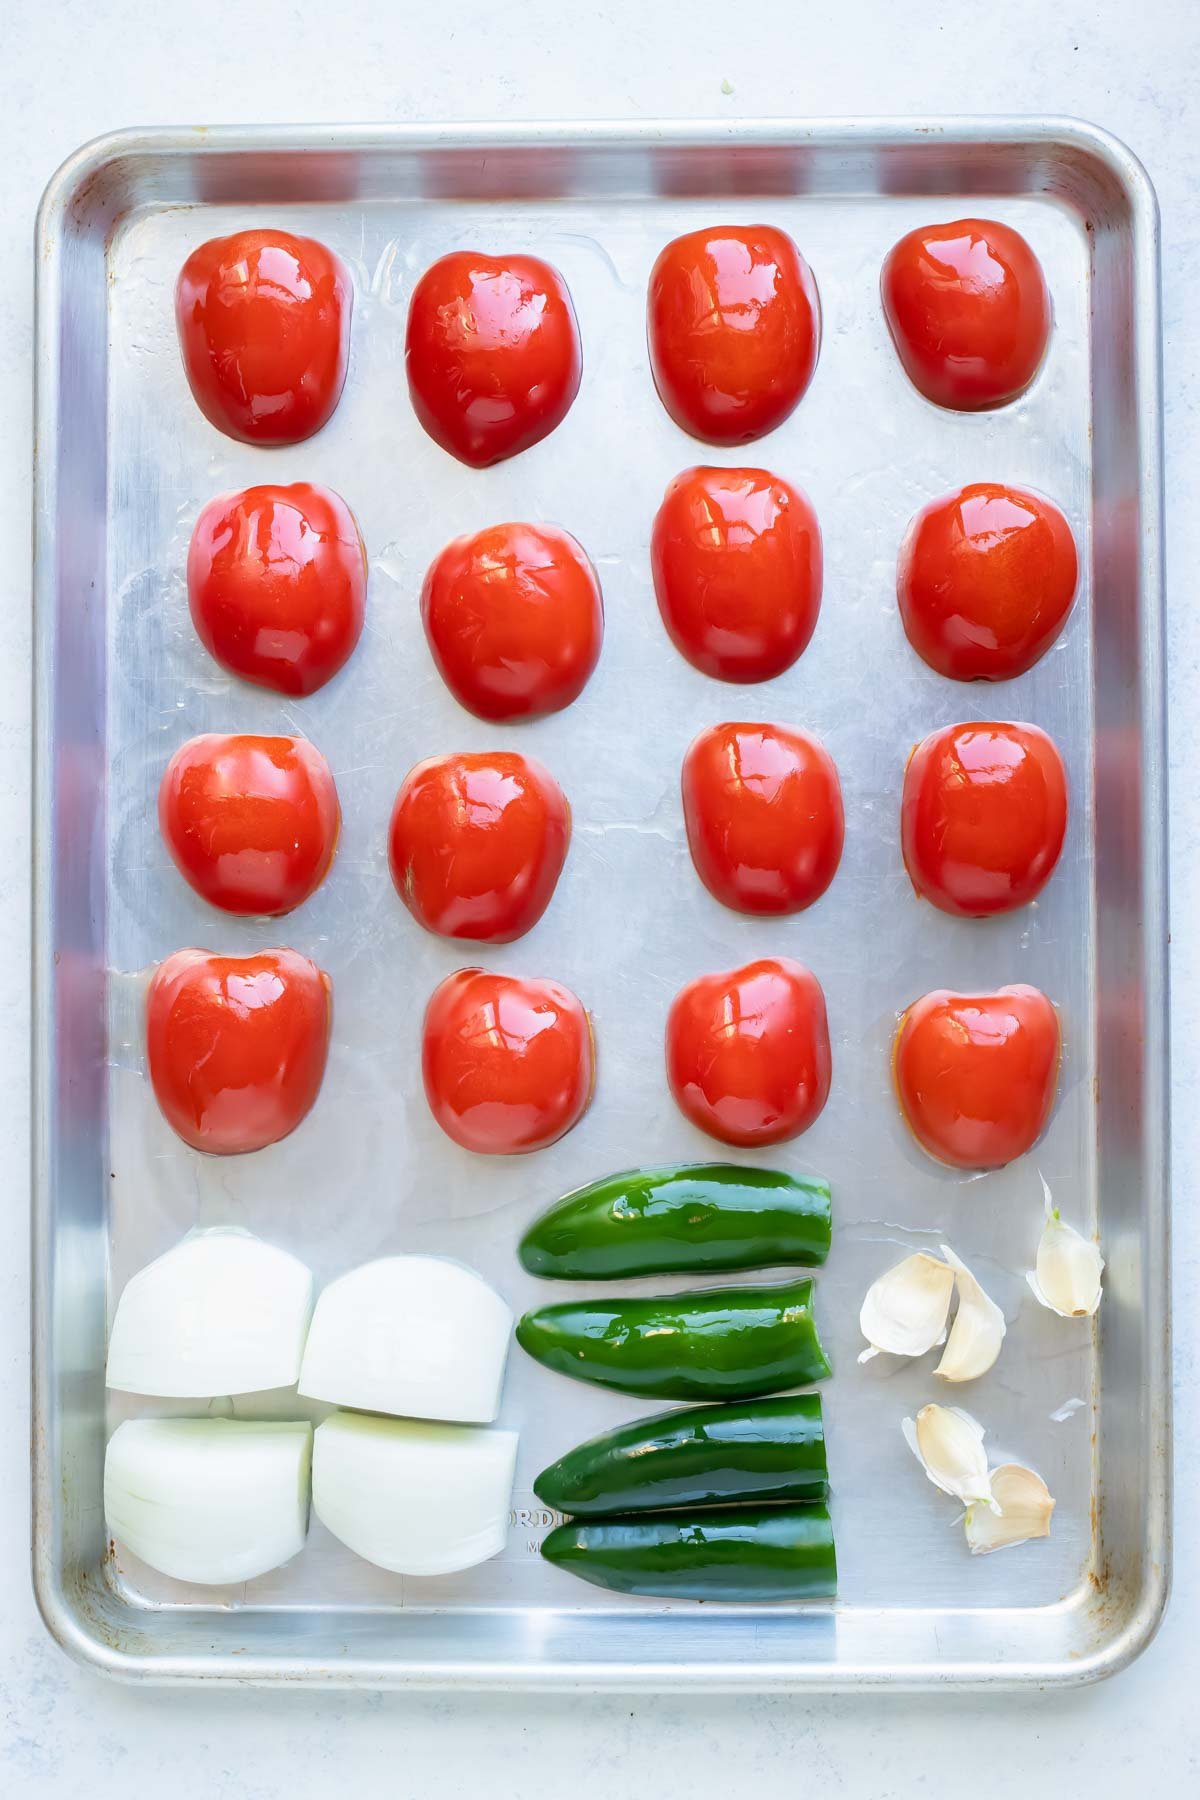 Tomatoes, onion, jalapeño peppers, and garlic are placed on a baking sheet.